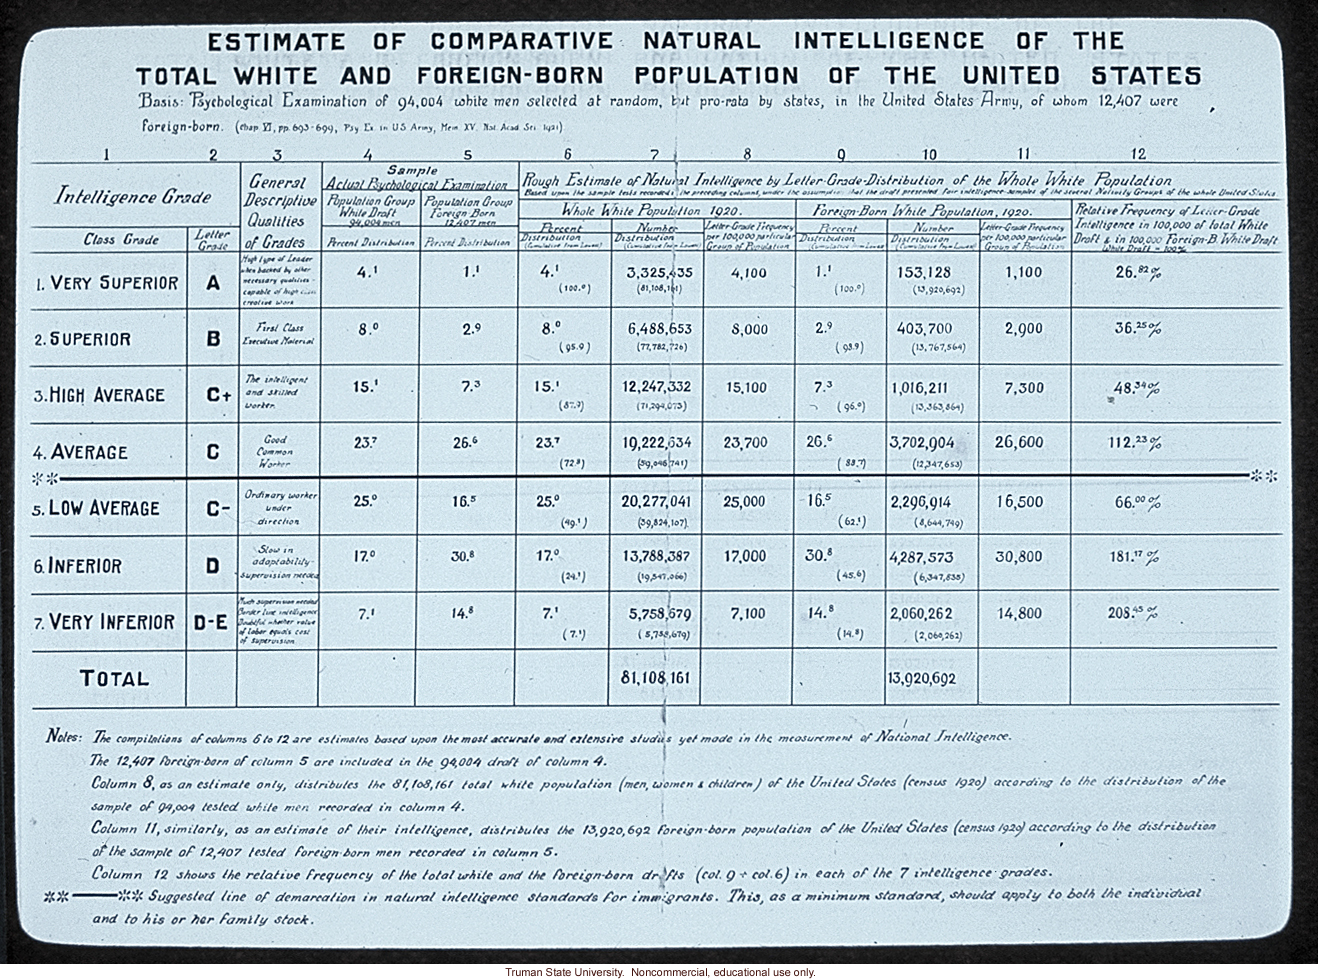 &quote;Estimate of comparative natural intelligence of the total white and foreign-born population of the United States&quote;